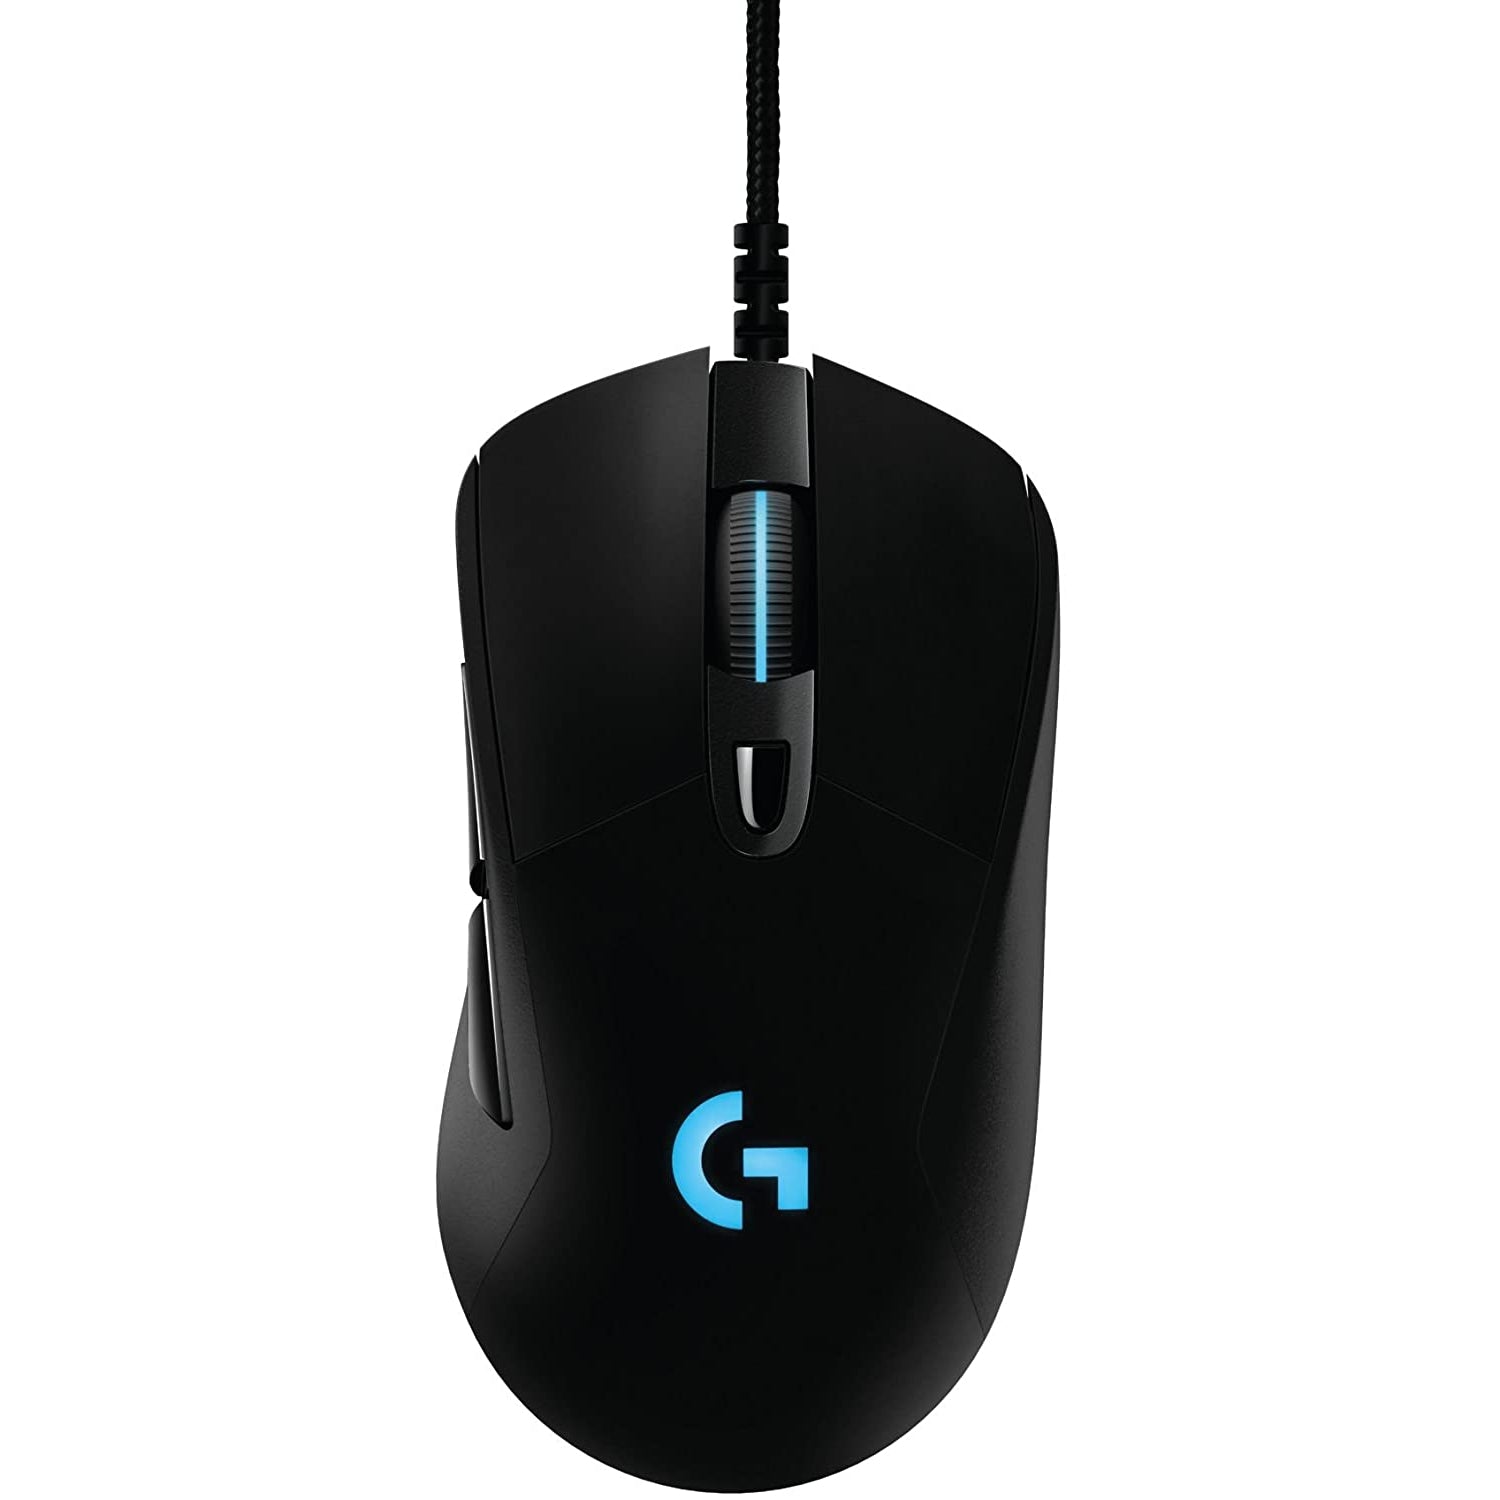 Logitech G403 Prodigy Wired Gaming Mouse - Refurbished Good